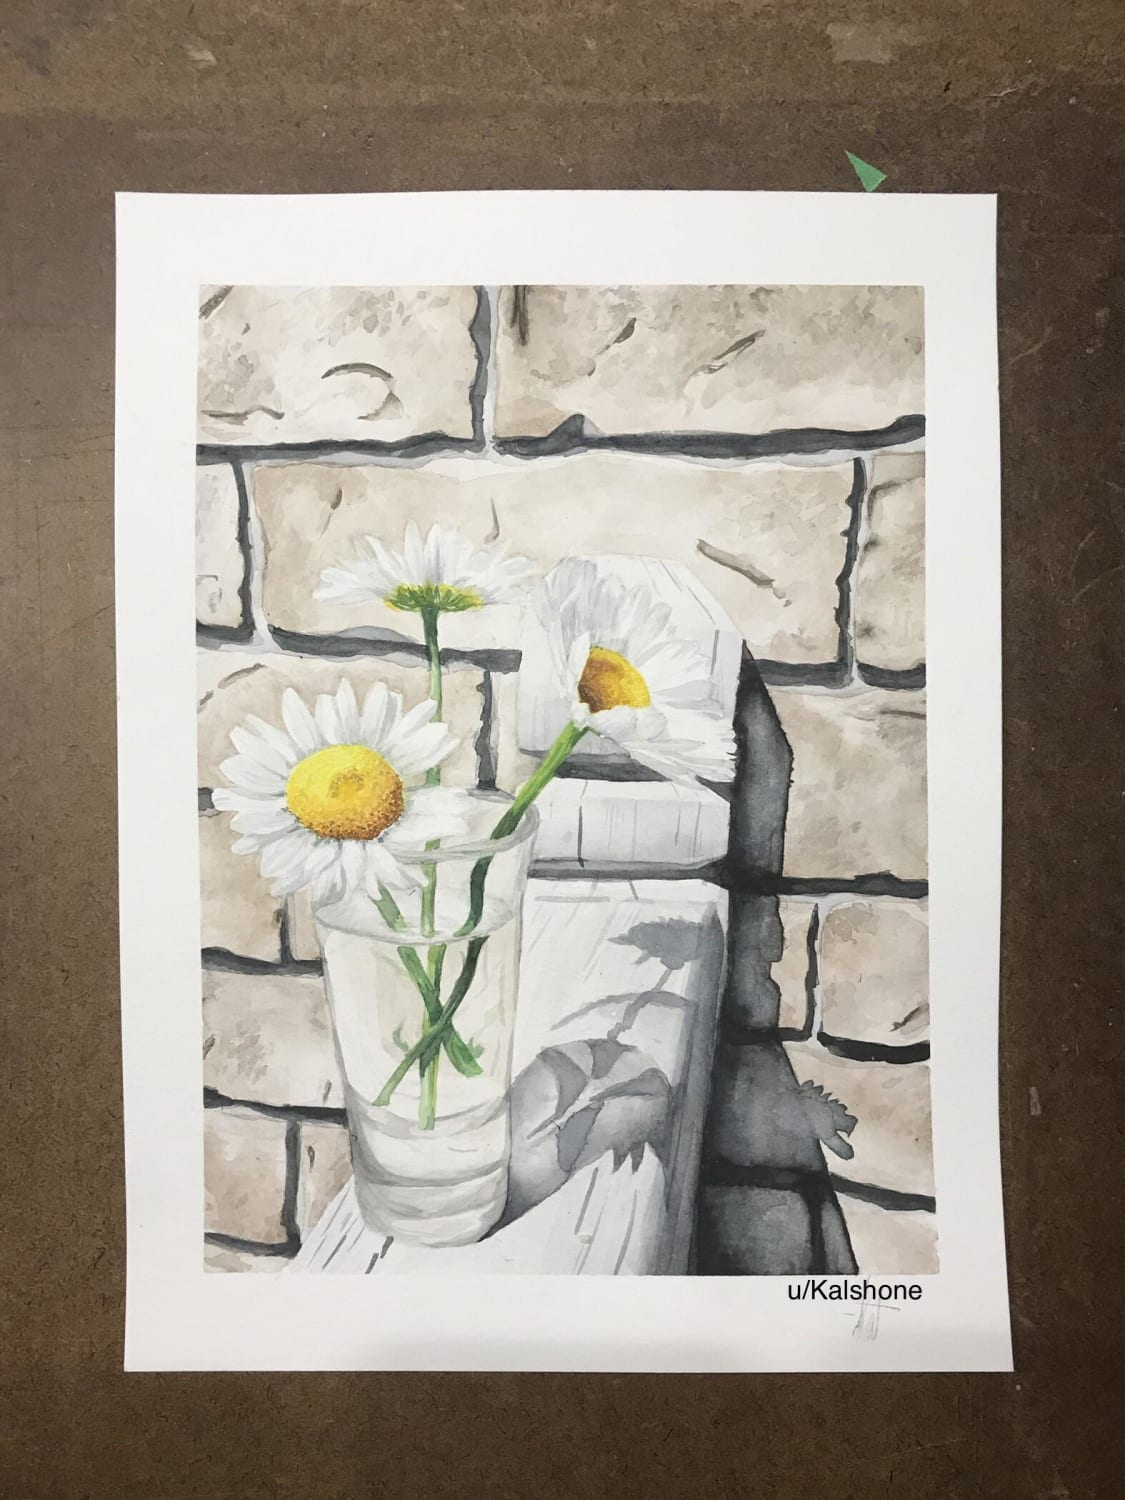 A painting of daisies i’ve recently done!